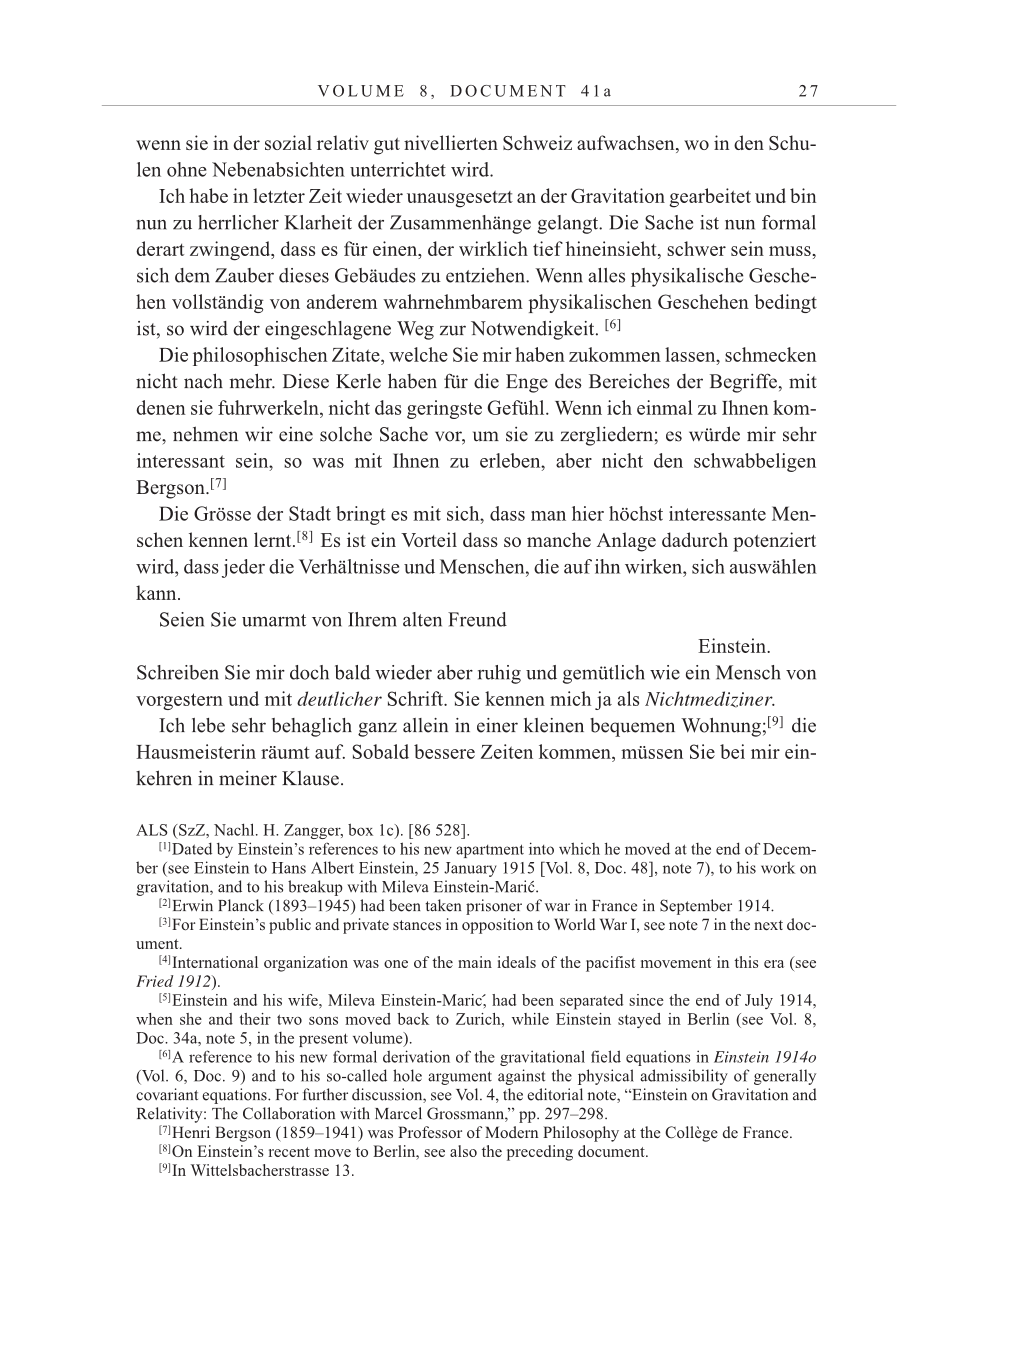 Volume 10: The Berlin Years: Correspondence May-December 1920 / Supplementary Correspondence 1909-1920 page 27